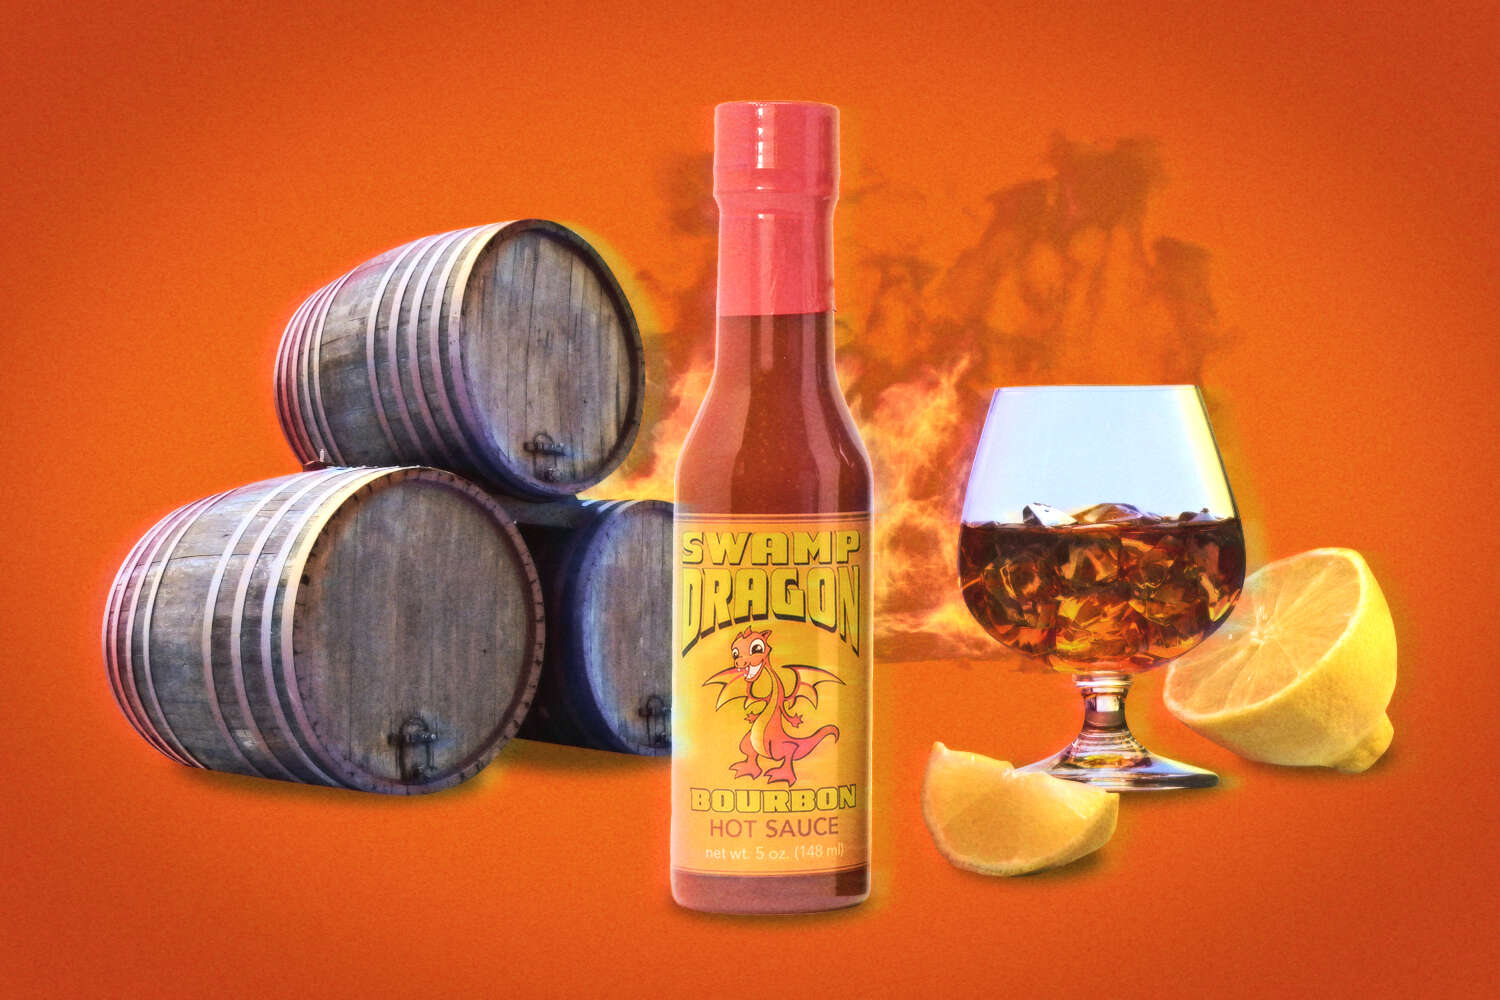 Swamp Dragon bourbon hot sauce depiction with barrels, a glass, a lemon, and fire in background